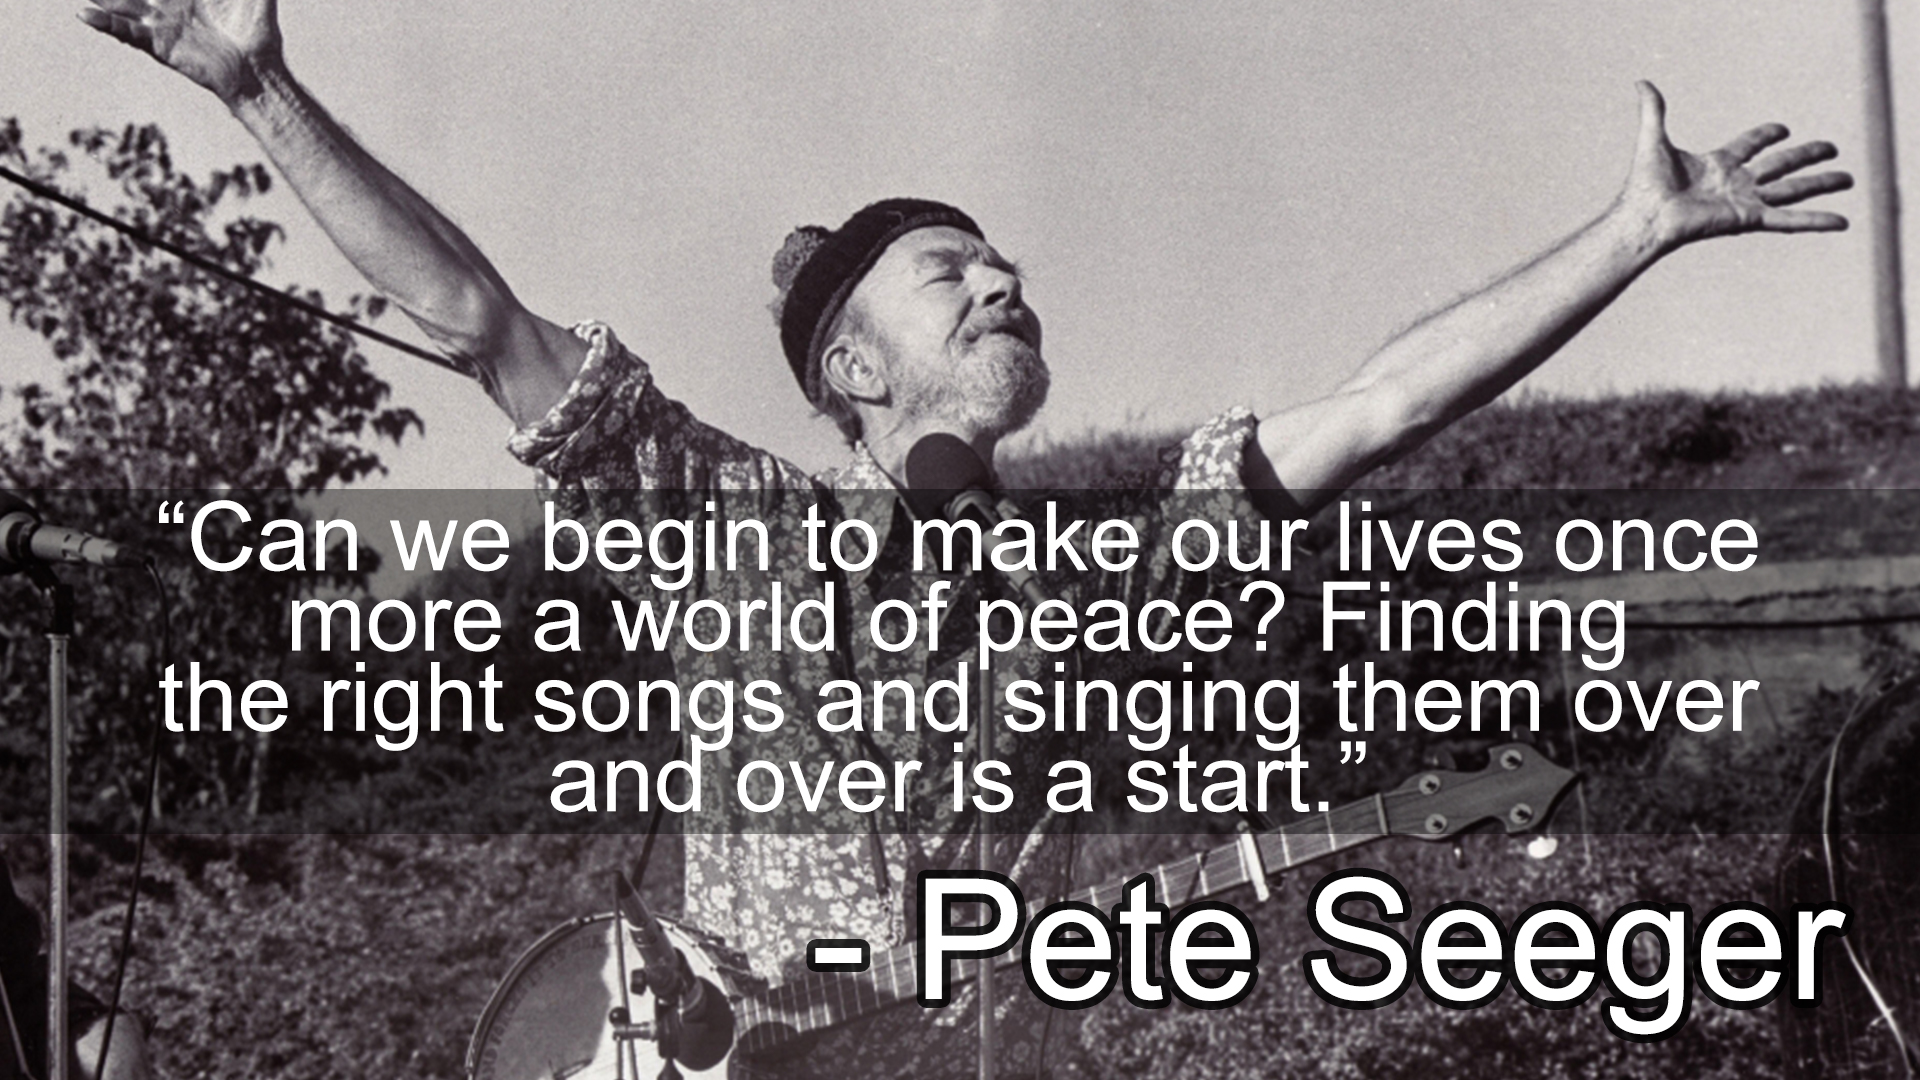 5 Days of a Great Musician: The Story & Music of Pete Seeger